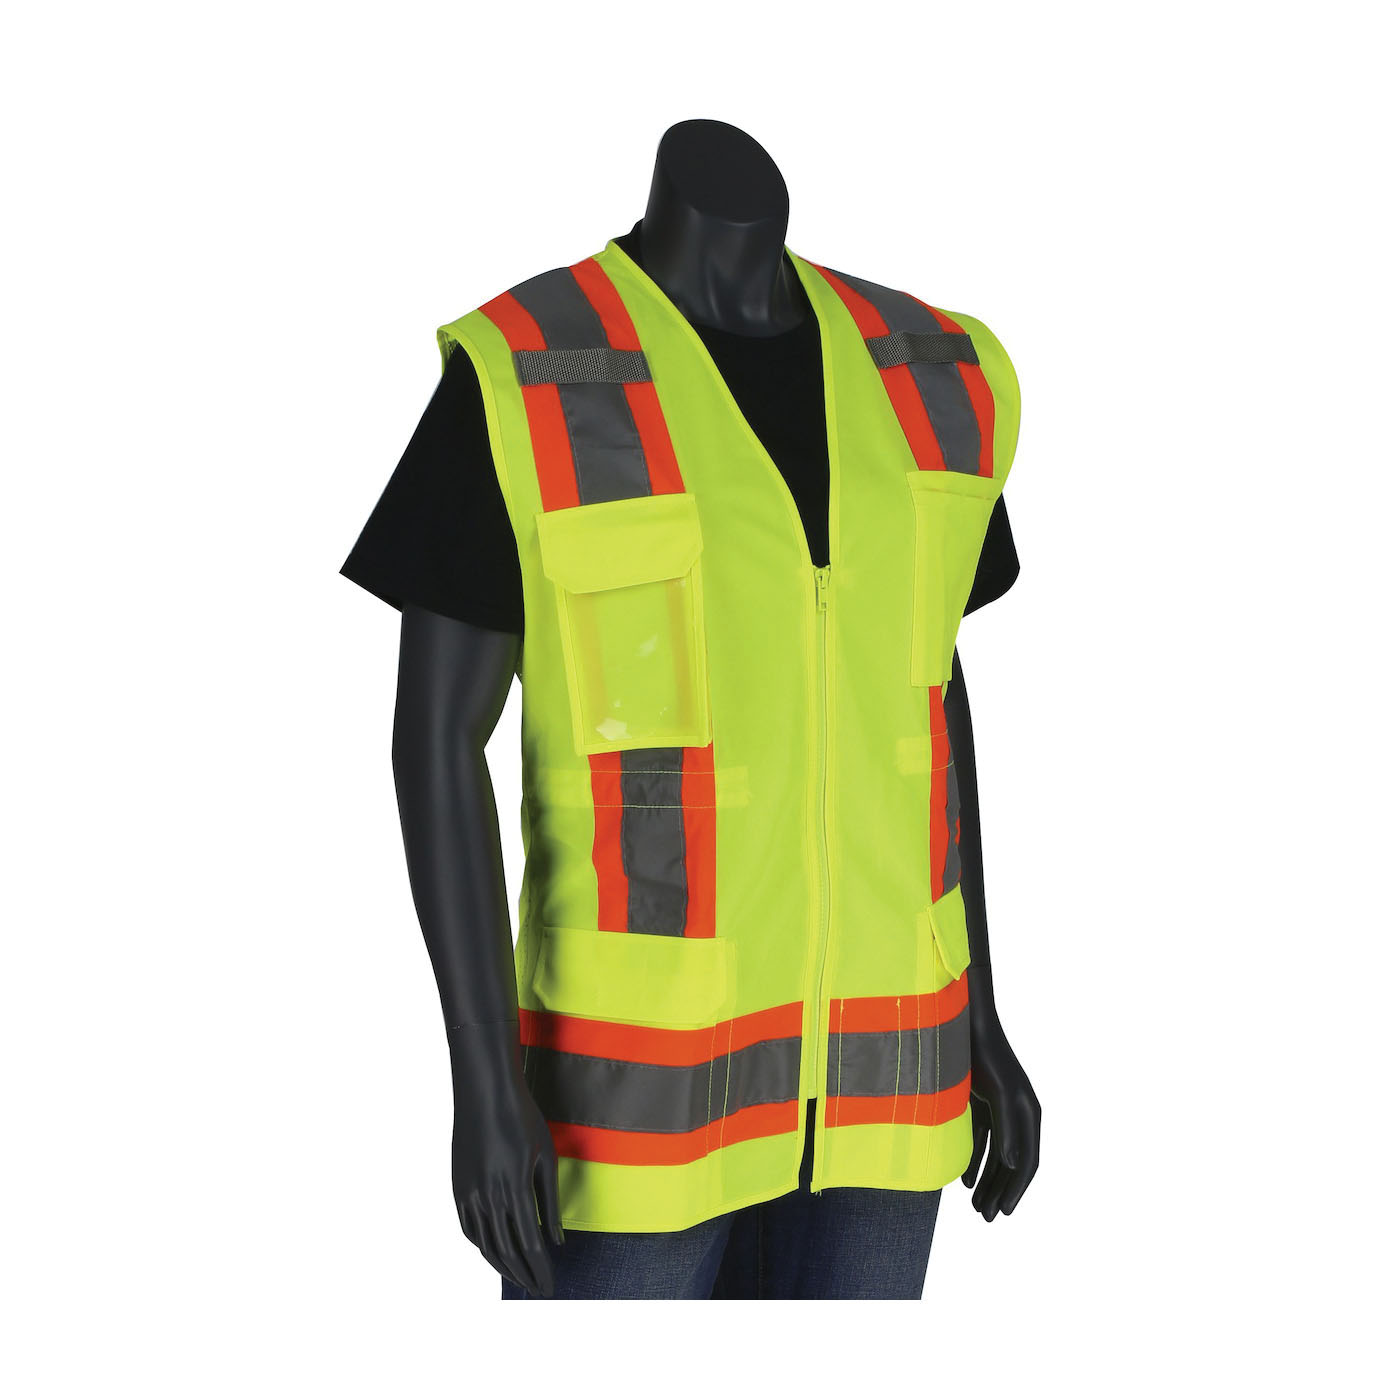 PIP® 302-0512-LY/S 2-Tone Contoured Surveyor's Vest With Solid Front and Mesh Back, S, Hi-Vis Yellow, 100% Polyester Mesh/Solid Tricot Knit, Zipper Closure, 11 Pockets, ANSI Class: Type/Class R2